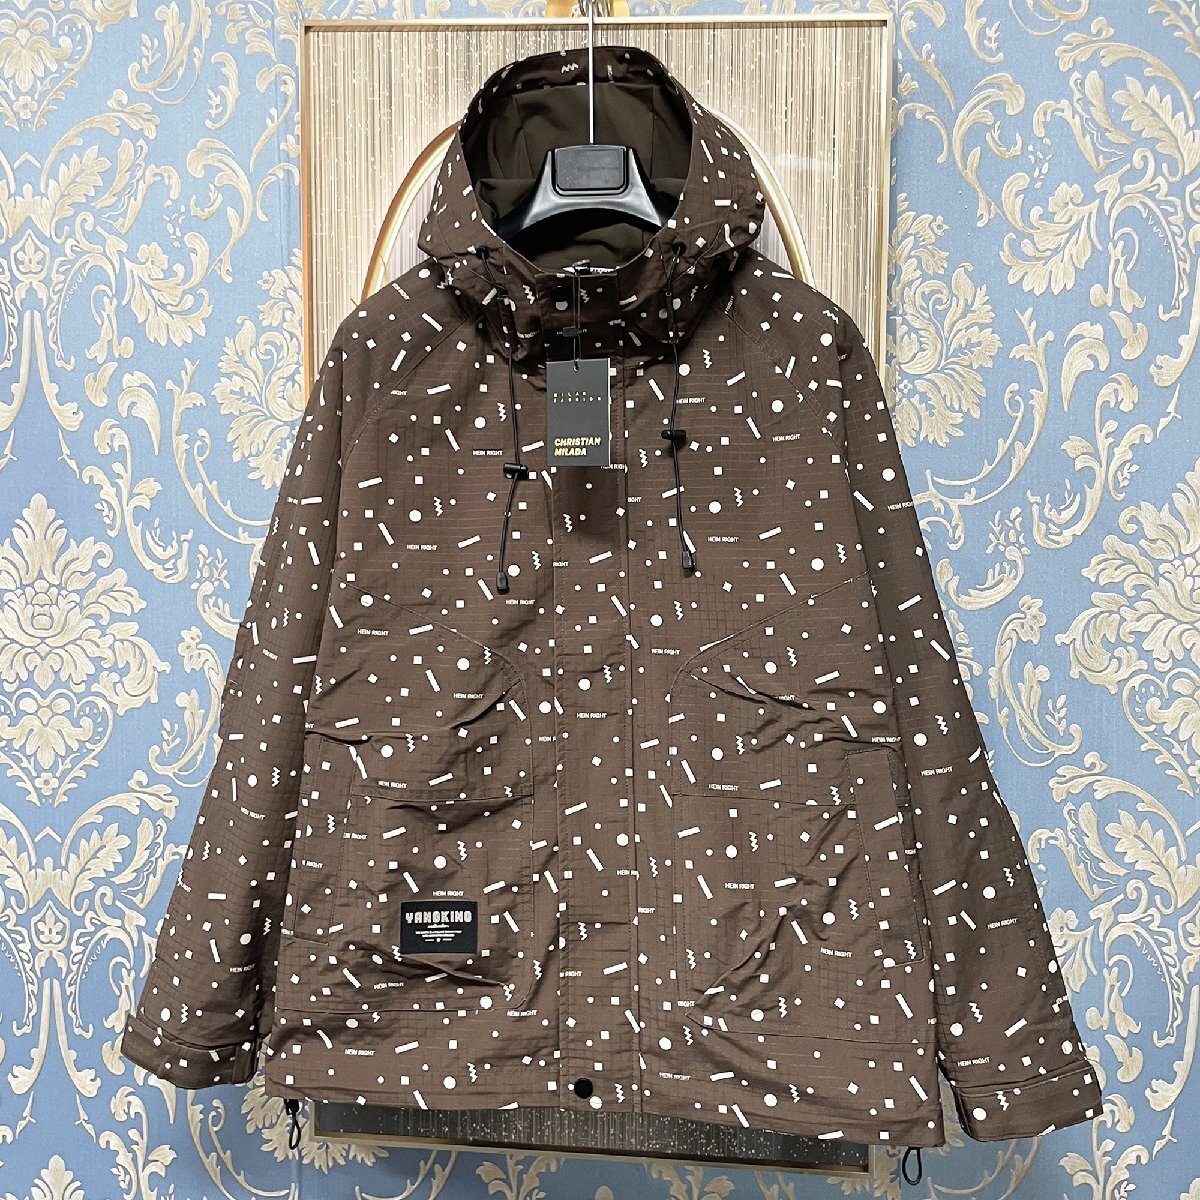  regular price 6 ten thousand *christian milada* milano departure * jacket * high class protection against cold . manner thin total pattern piece . outer dressing up mountain parka 2XL/52 size 